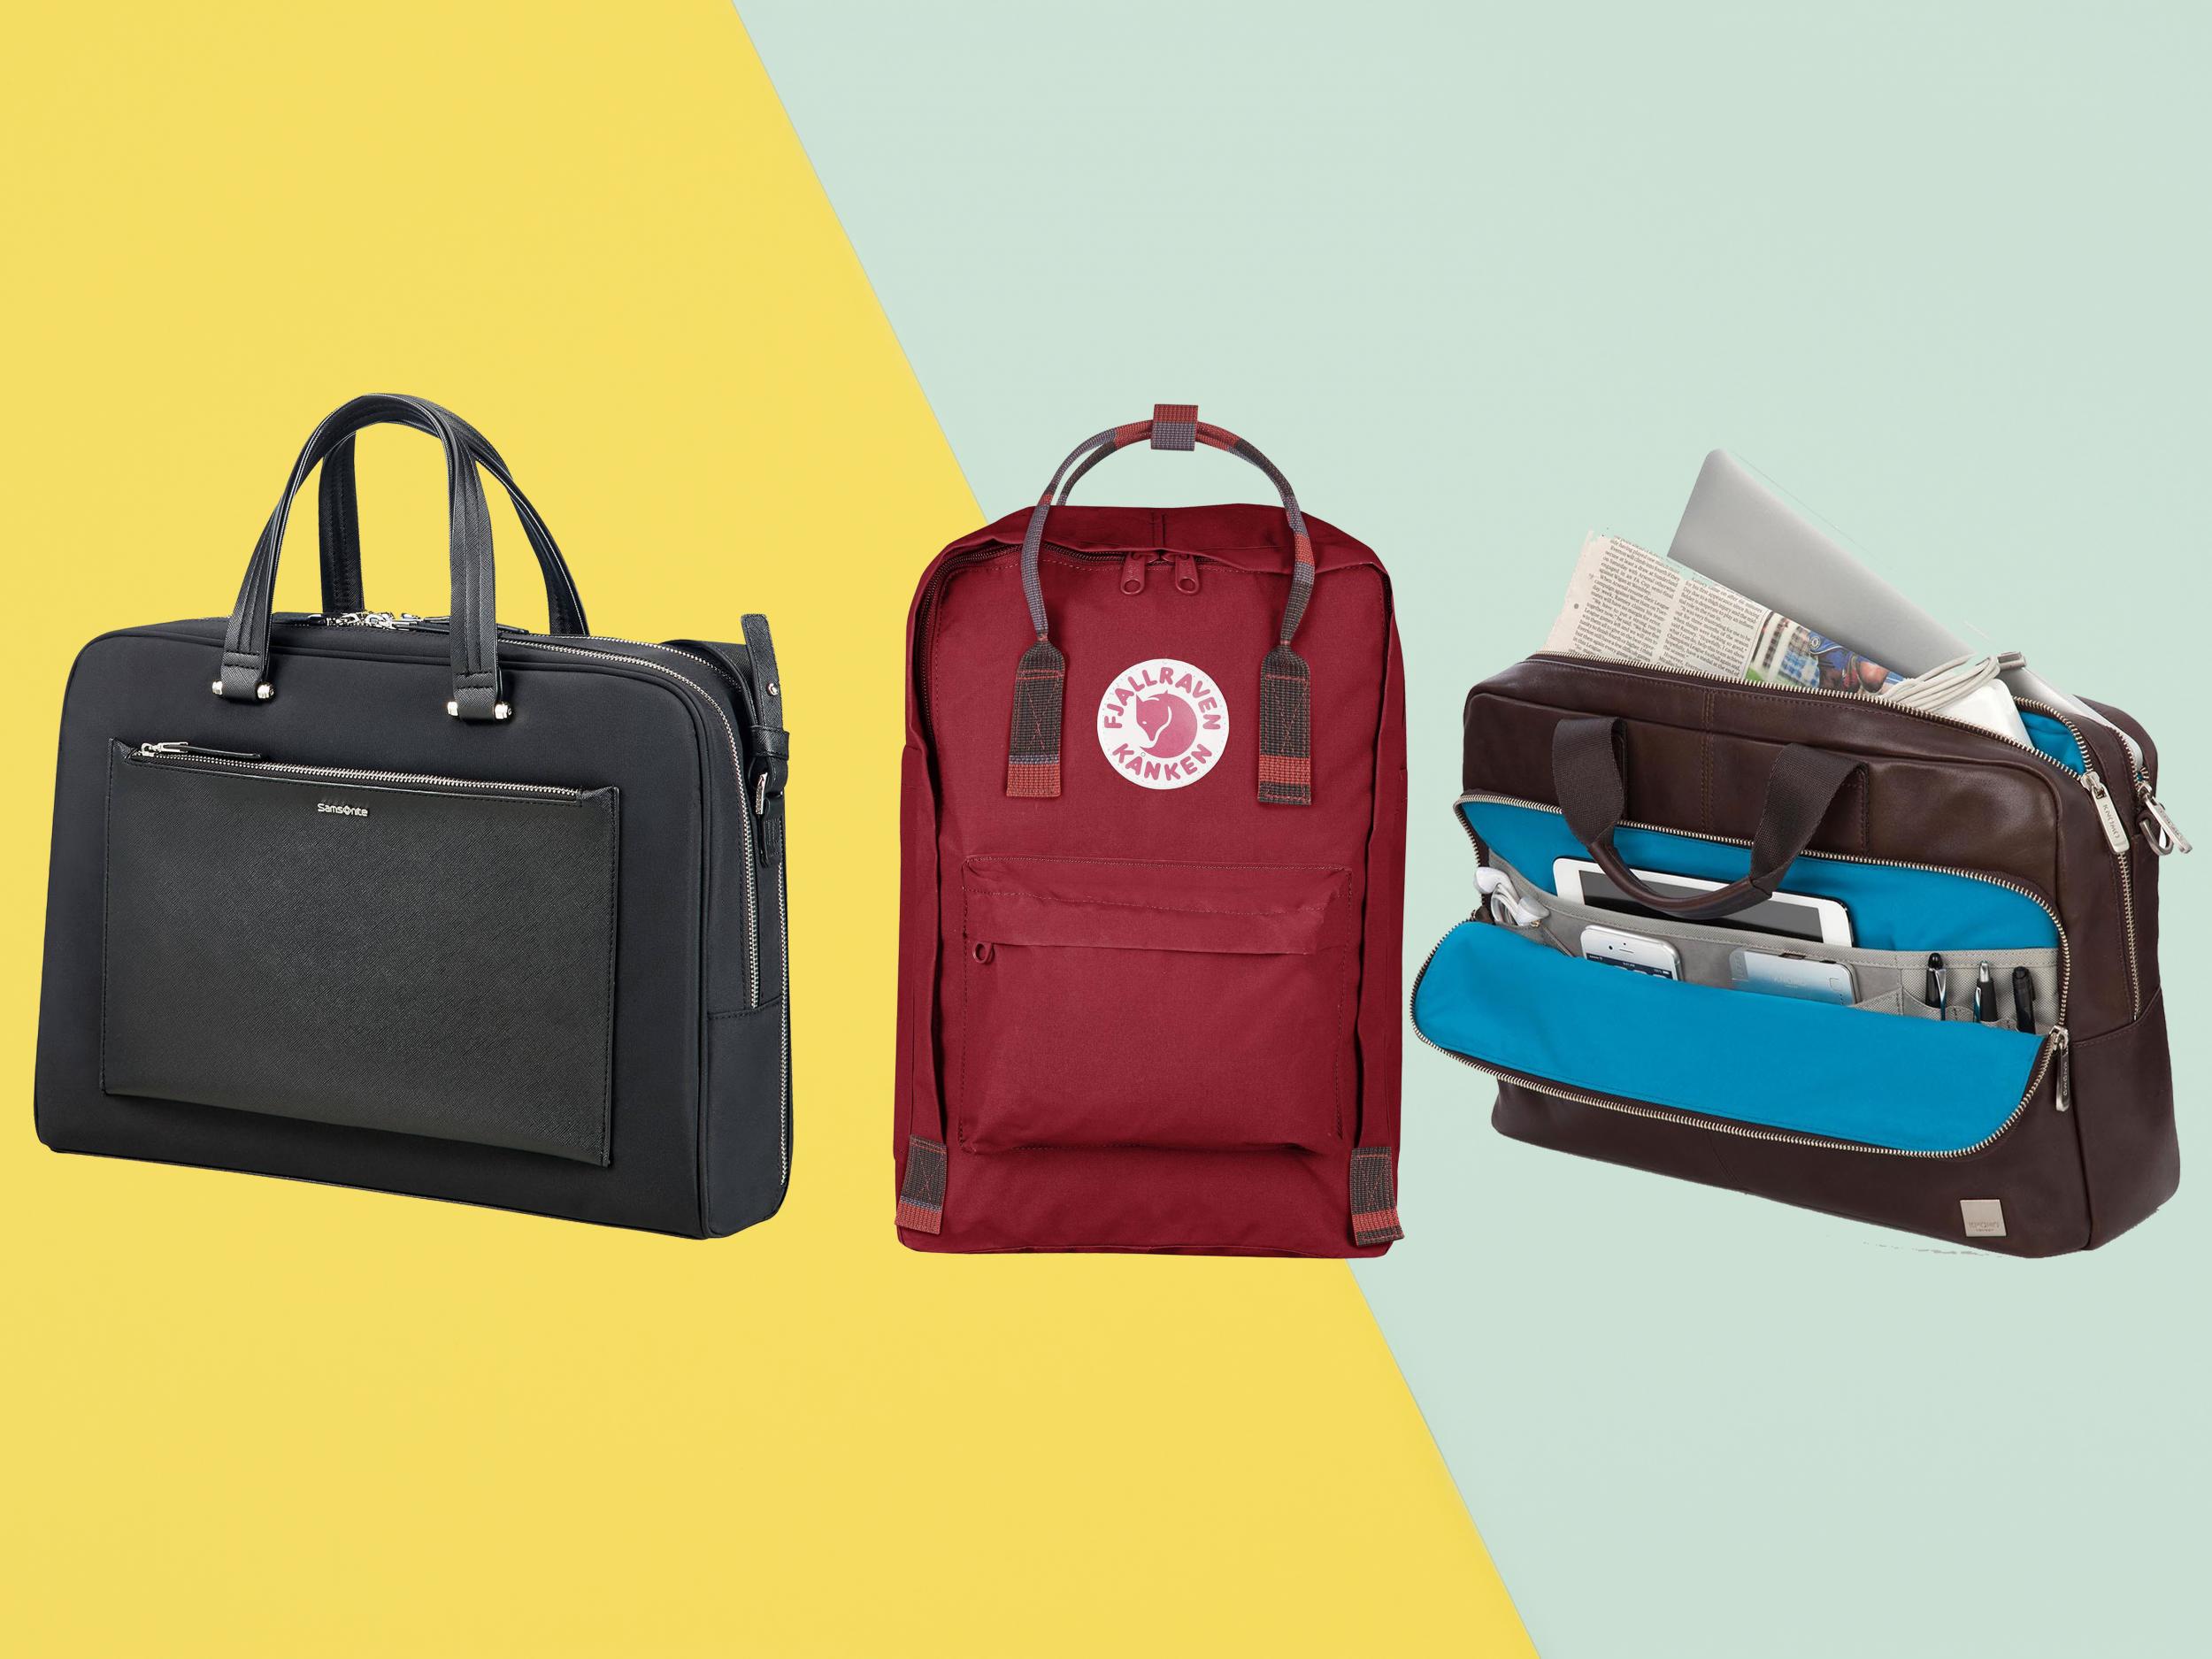 Best laptop bags and cases: Messenger bags, backpacks and 